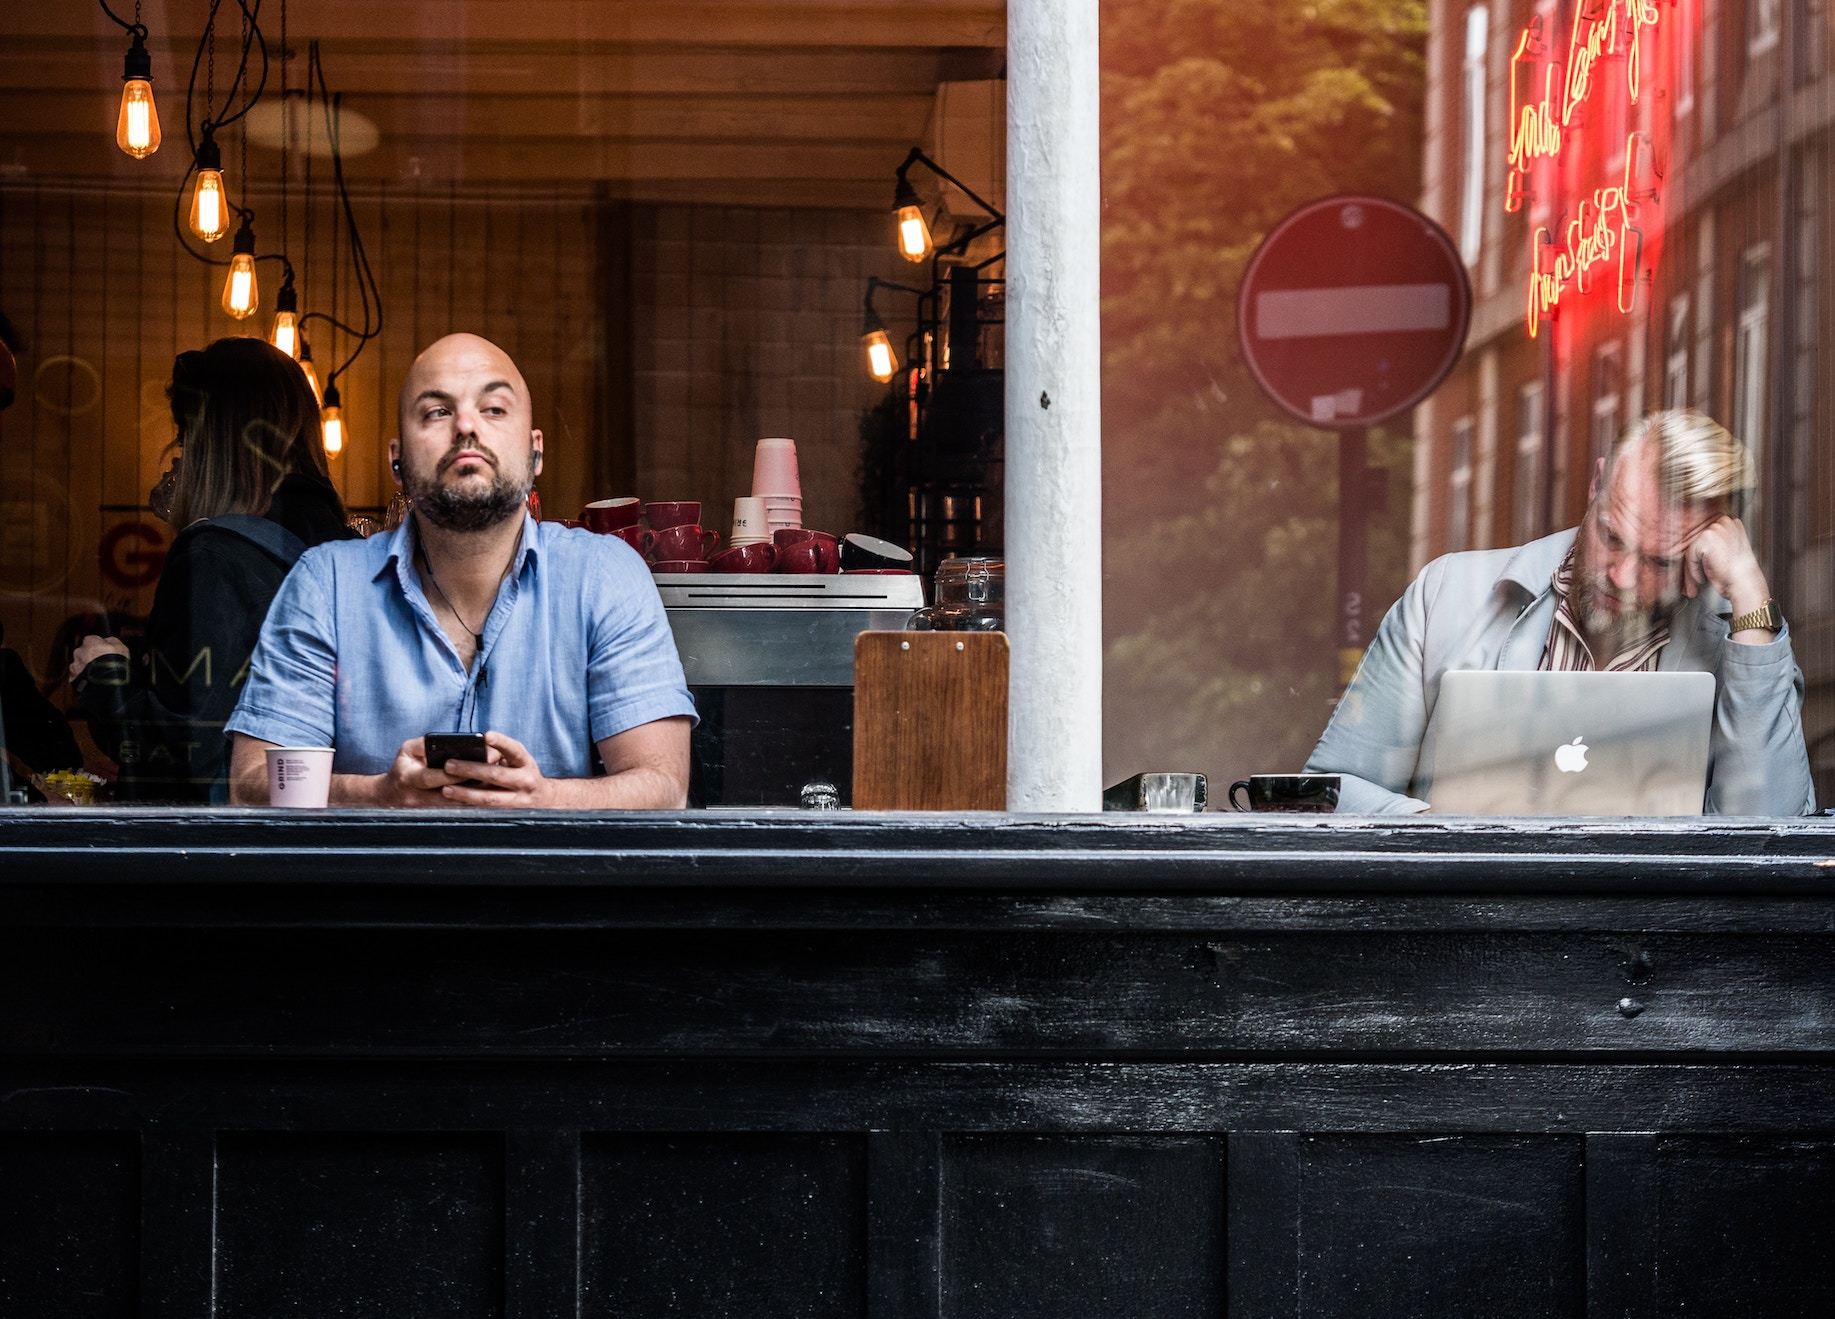 Two men at a cafe counter, one searches on laptop whiel the other looks out to the street